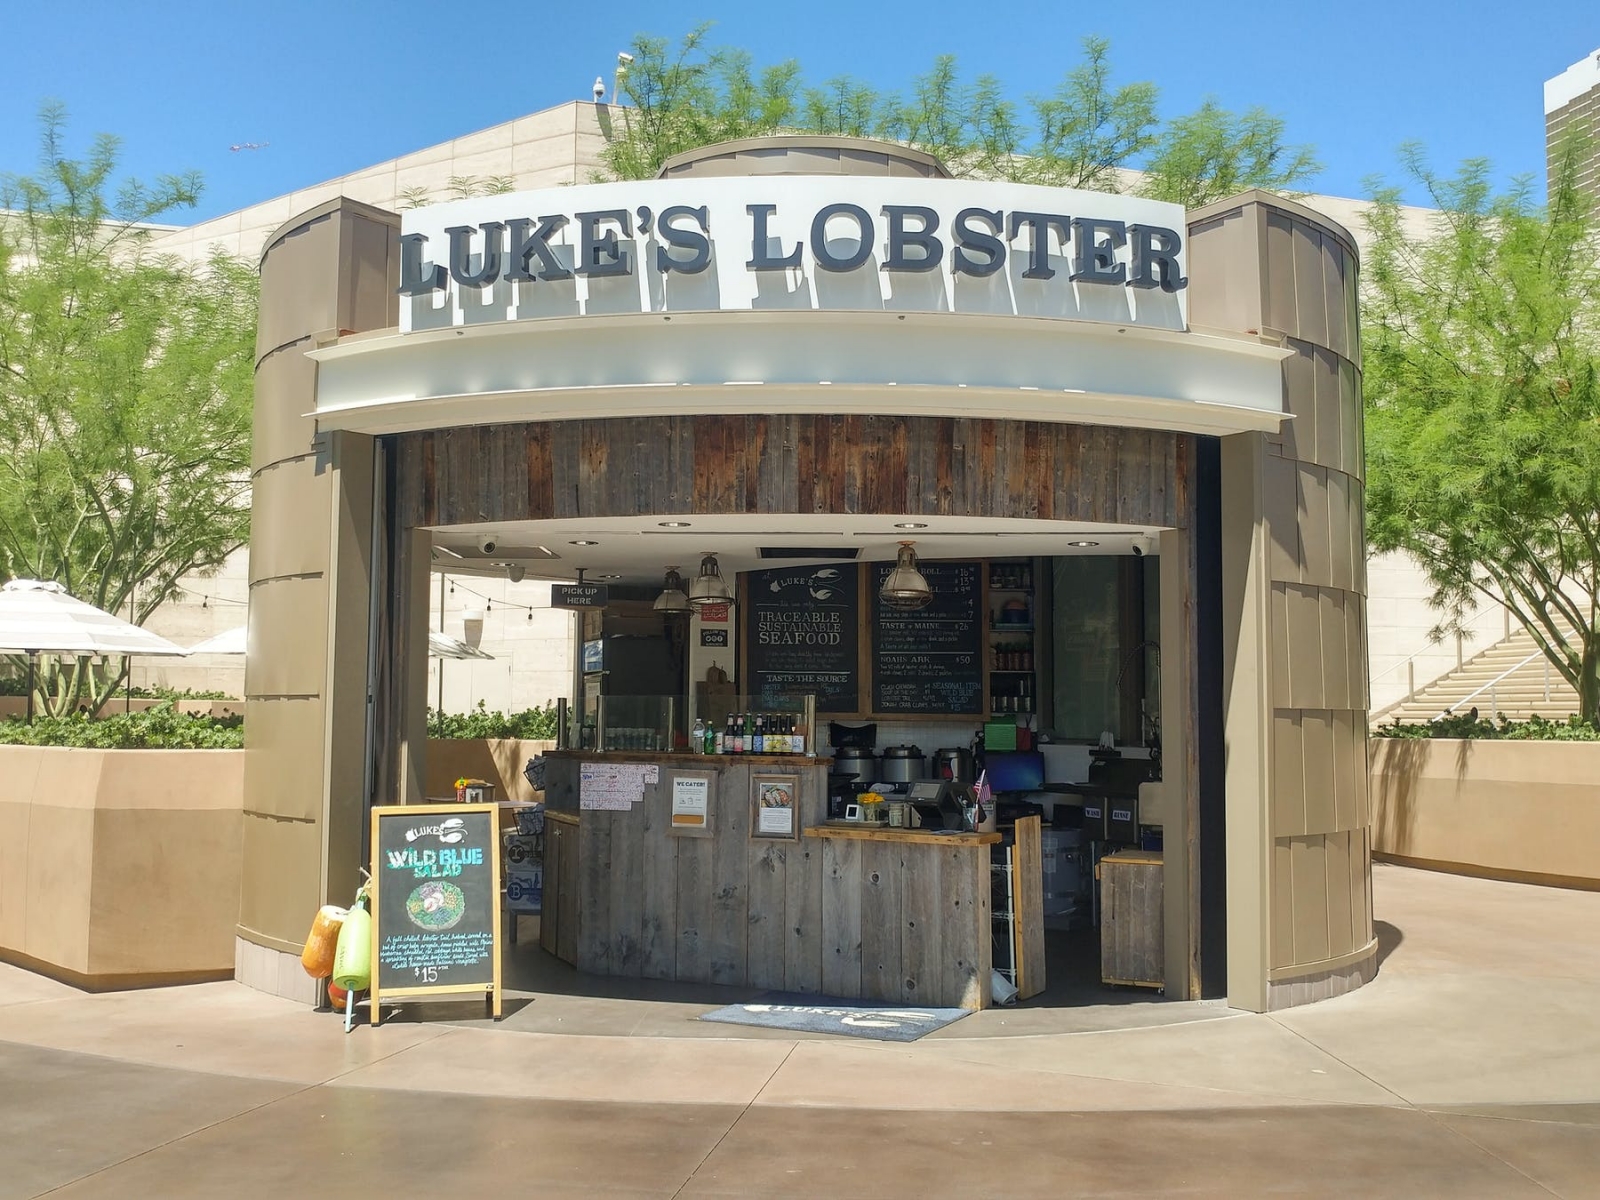 Lukes Lobster, Boating on the East Coast - Where to Eat and Stay